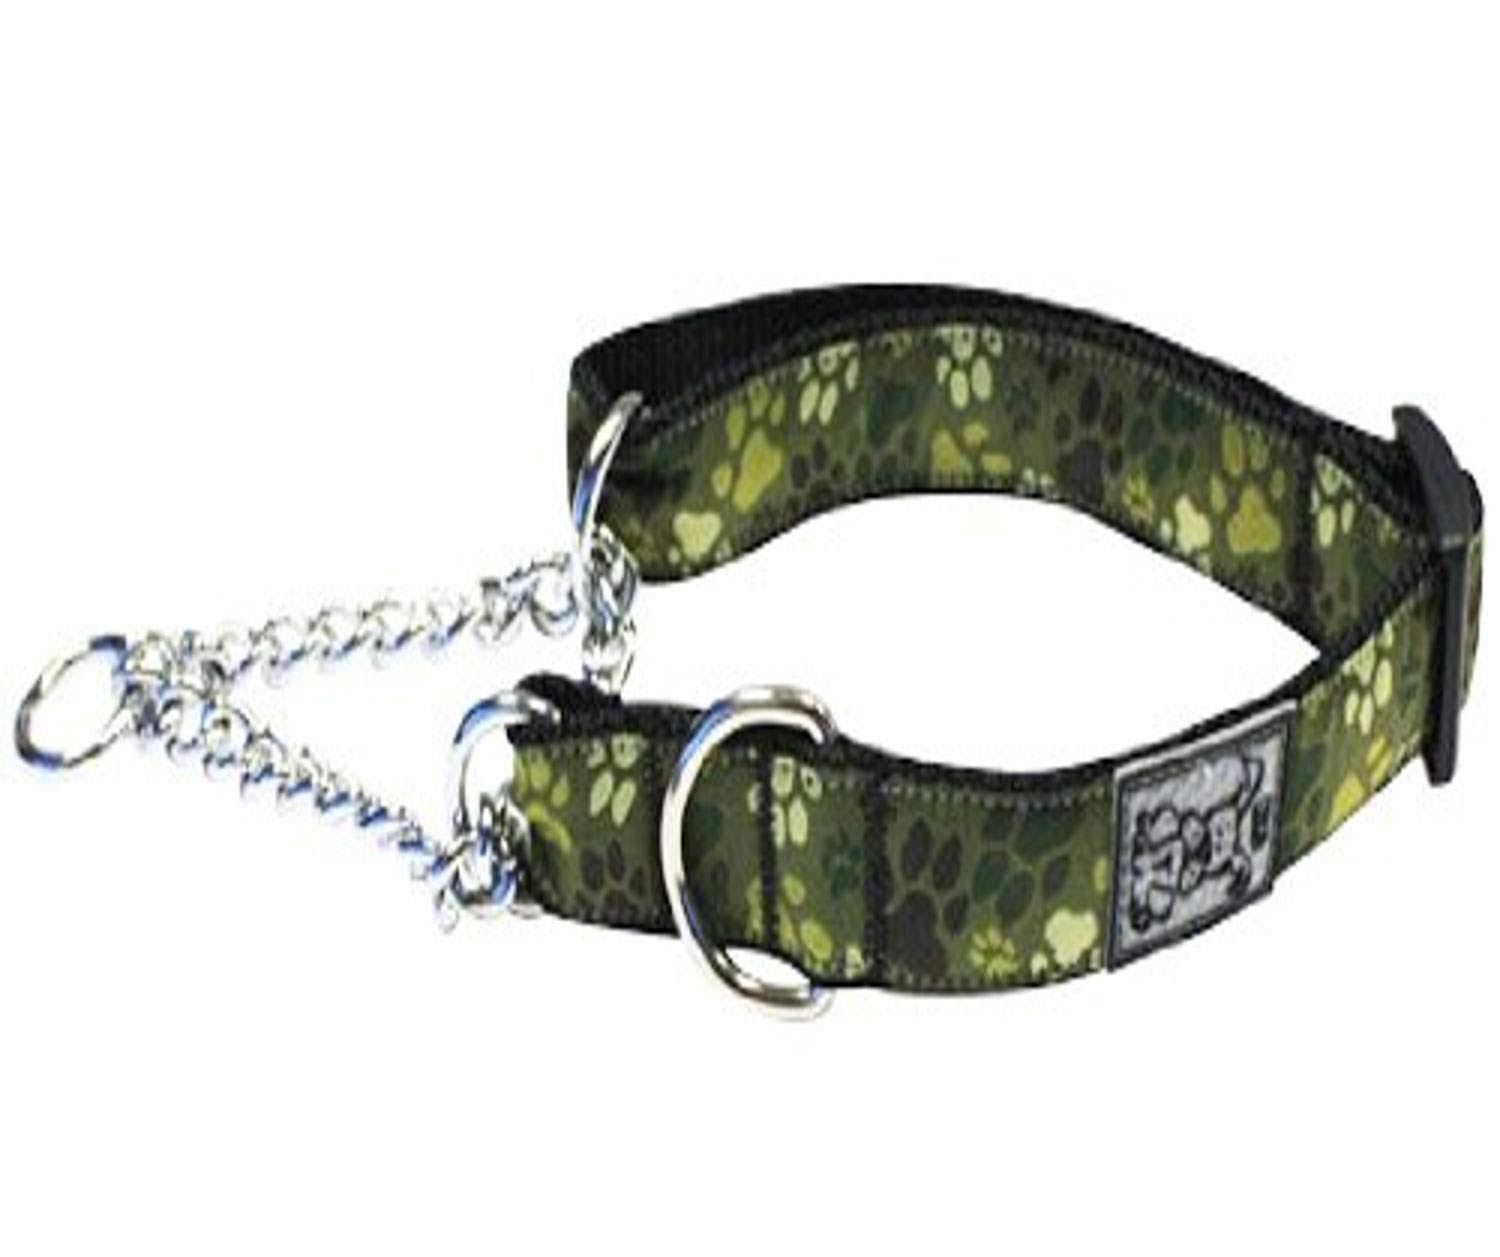 RC Pet Products Training Martingale Dog Collar - Pitter Patter Camo, Small, 3/4" Width